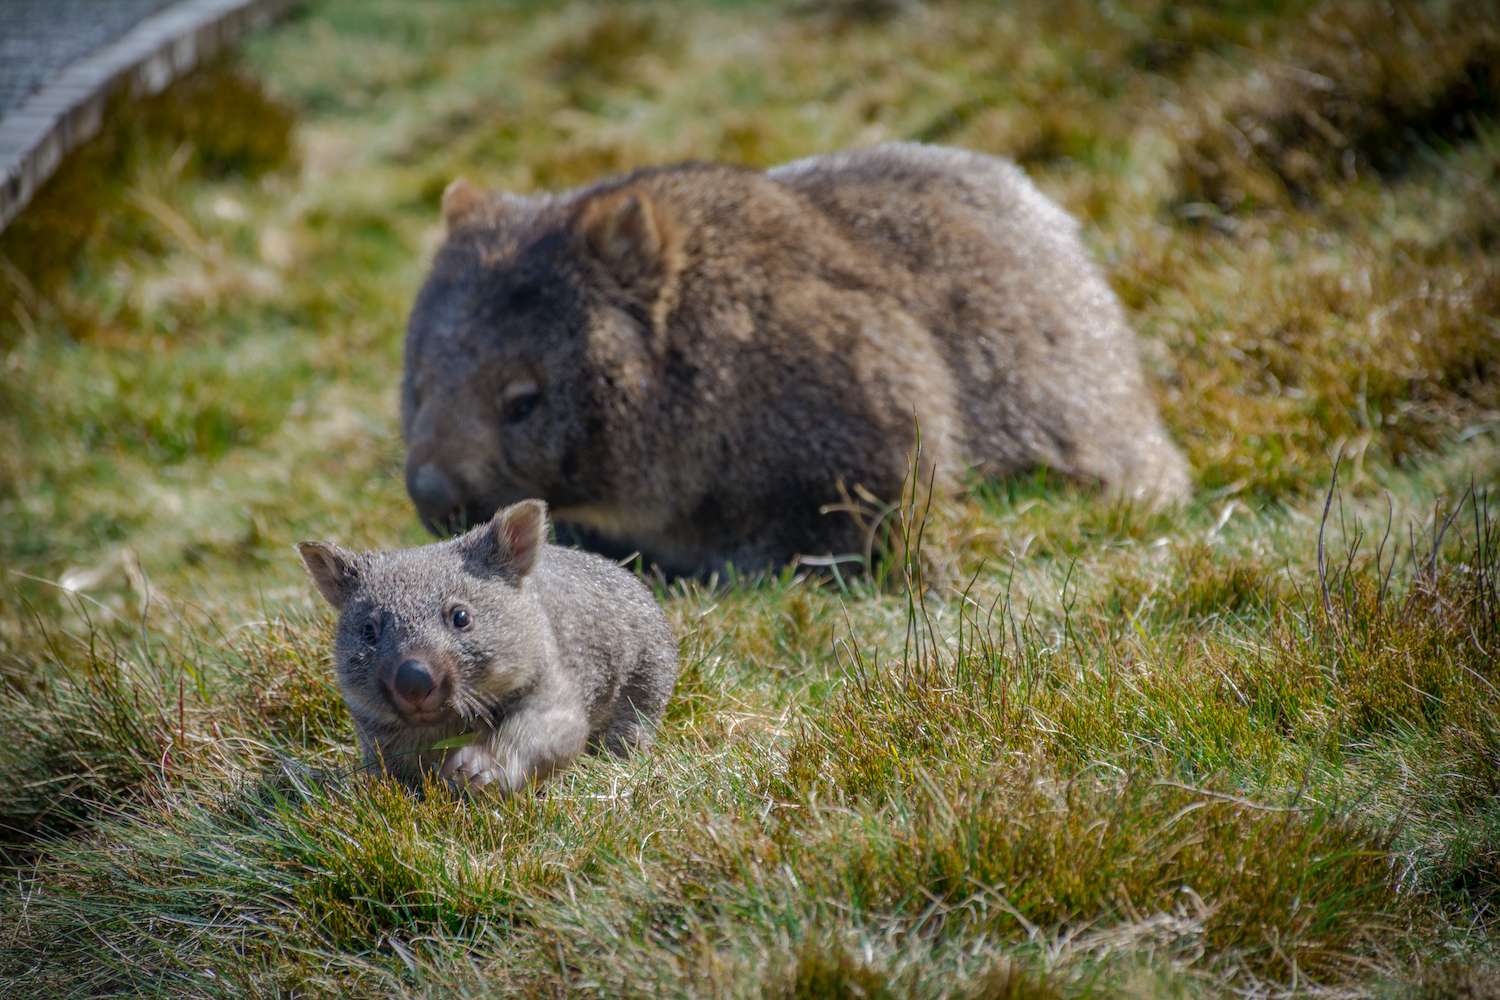 Joey wombat running from its mother in Cradle Mountain, Tasmania 